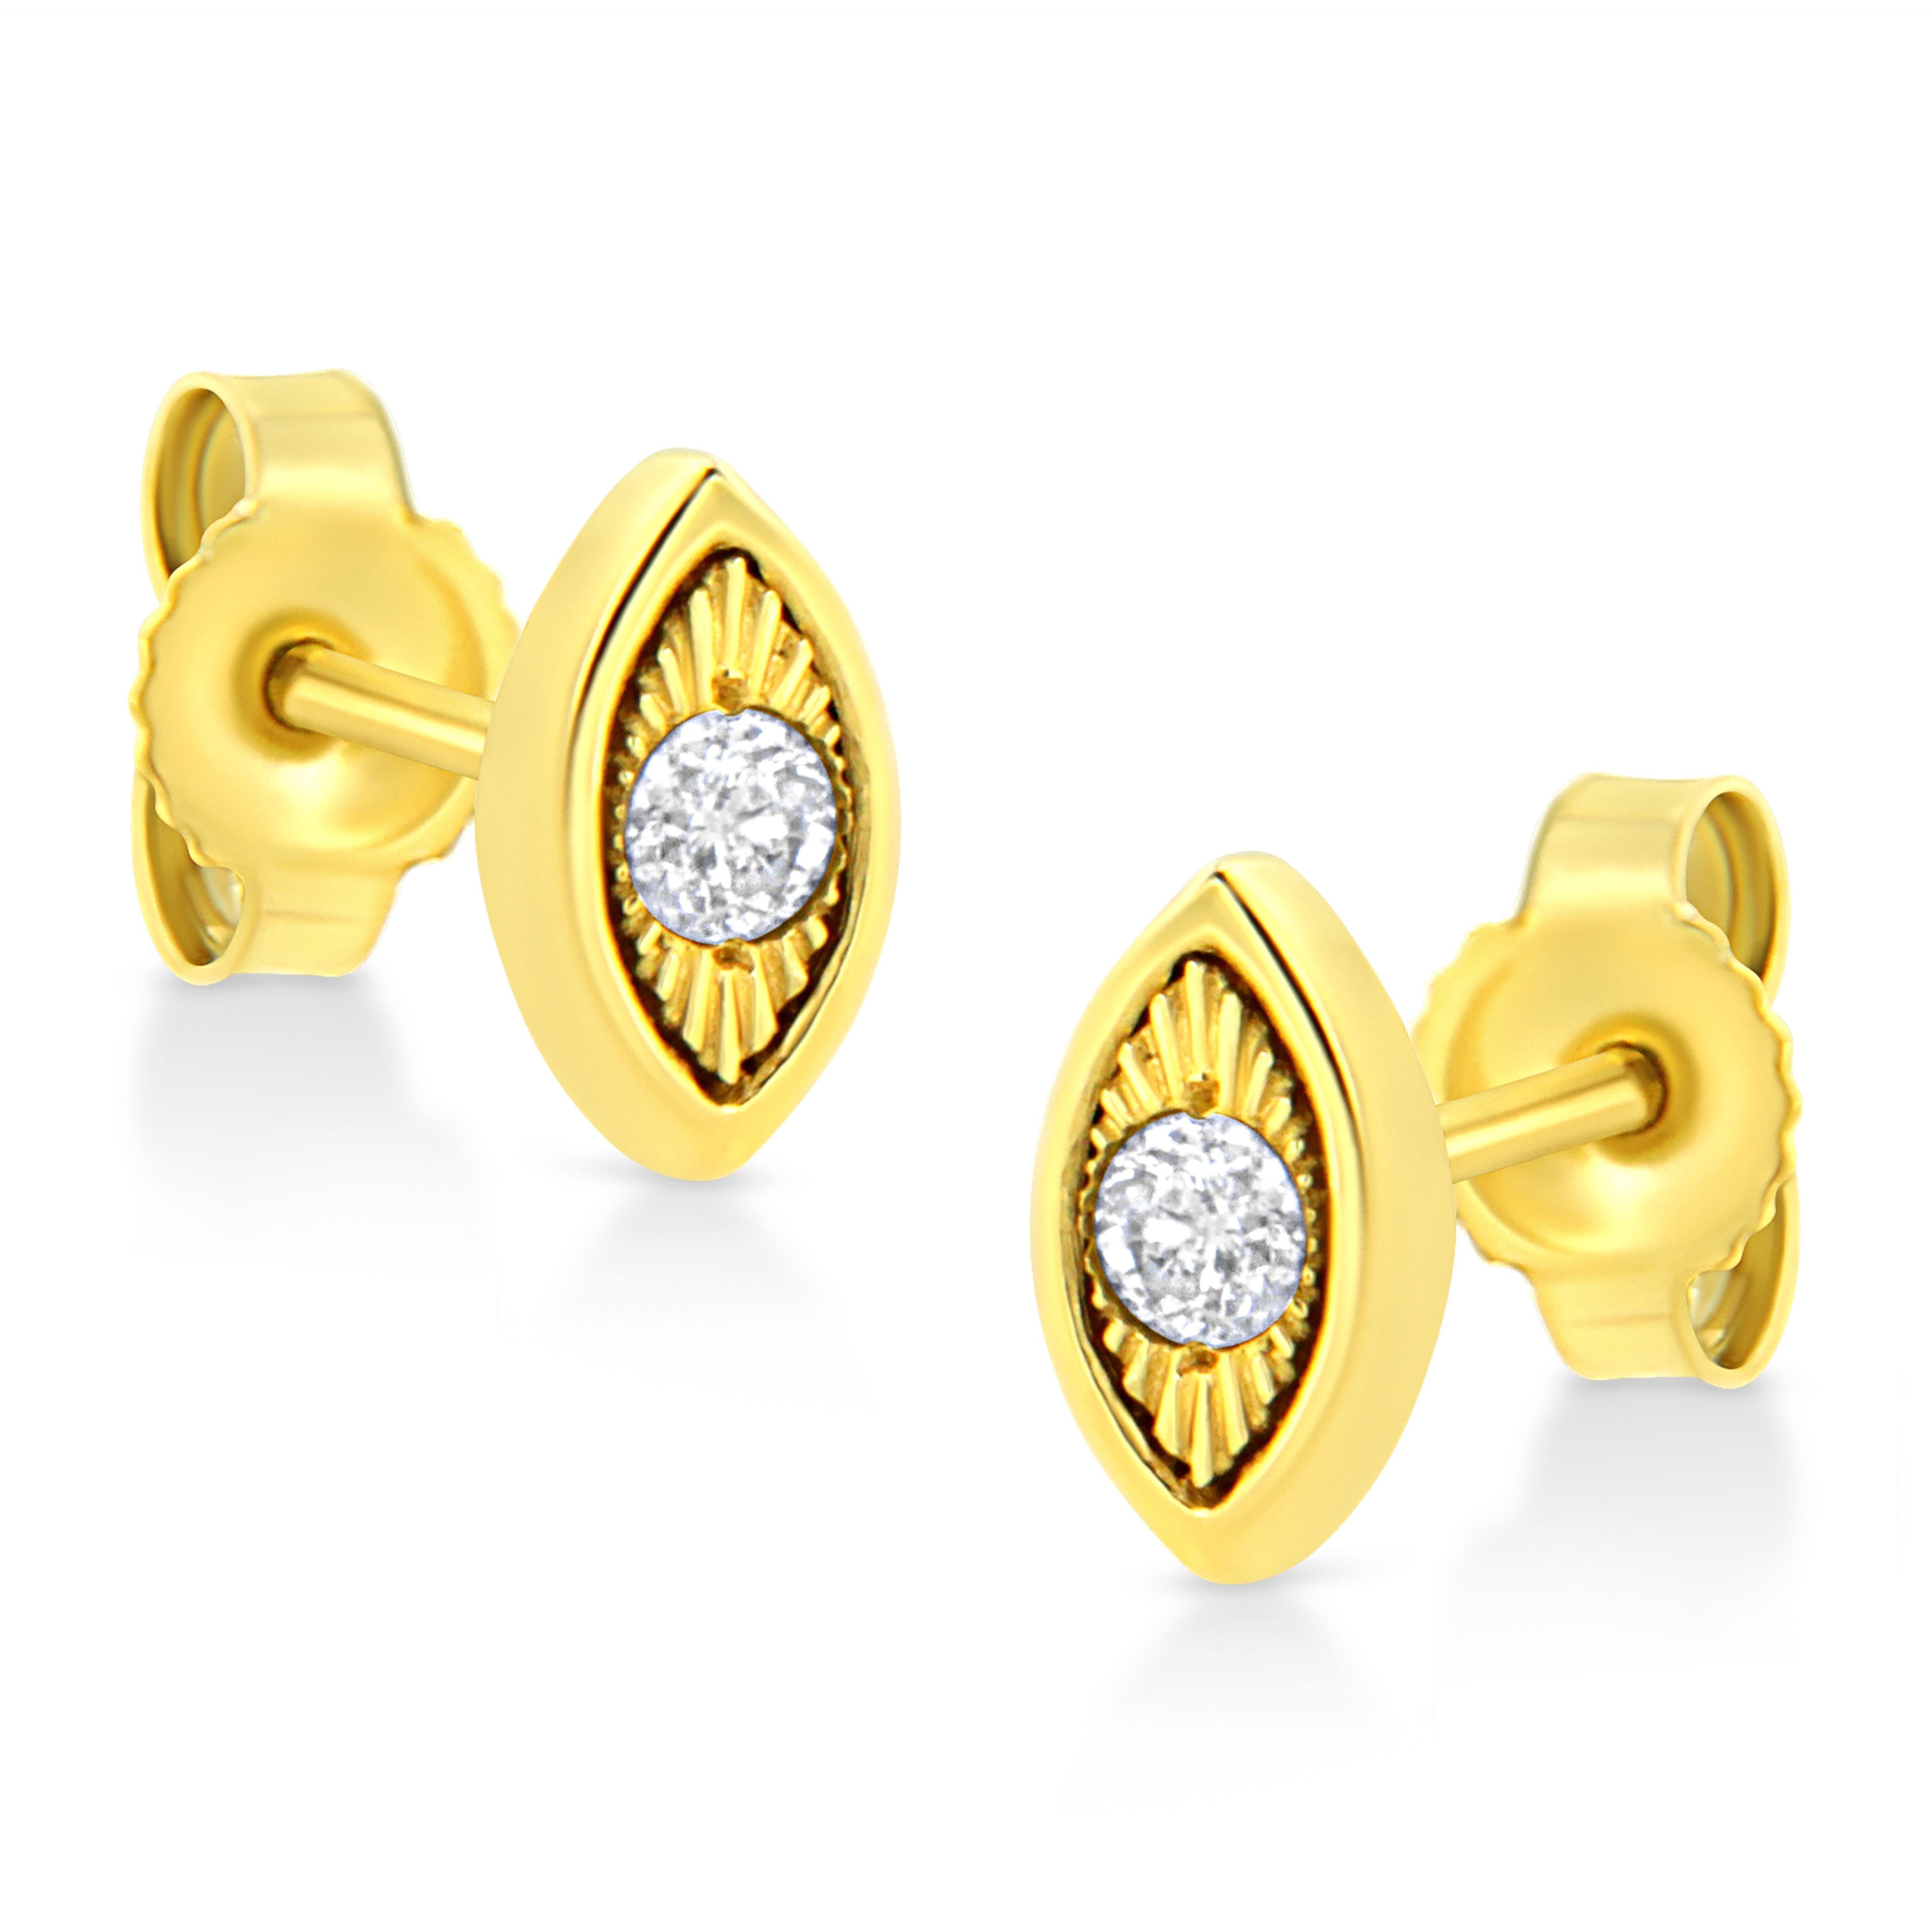 These marquise shaped stud earrings are crafted in 10k yellow gold plated sterling silver and feature 1/10ct TDW of diamonds. Each earring features a single sparkling round cut diamond in a miracle setting that adds to the earrings sparkle. A